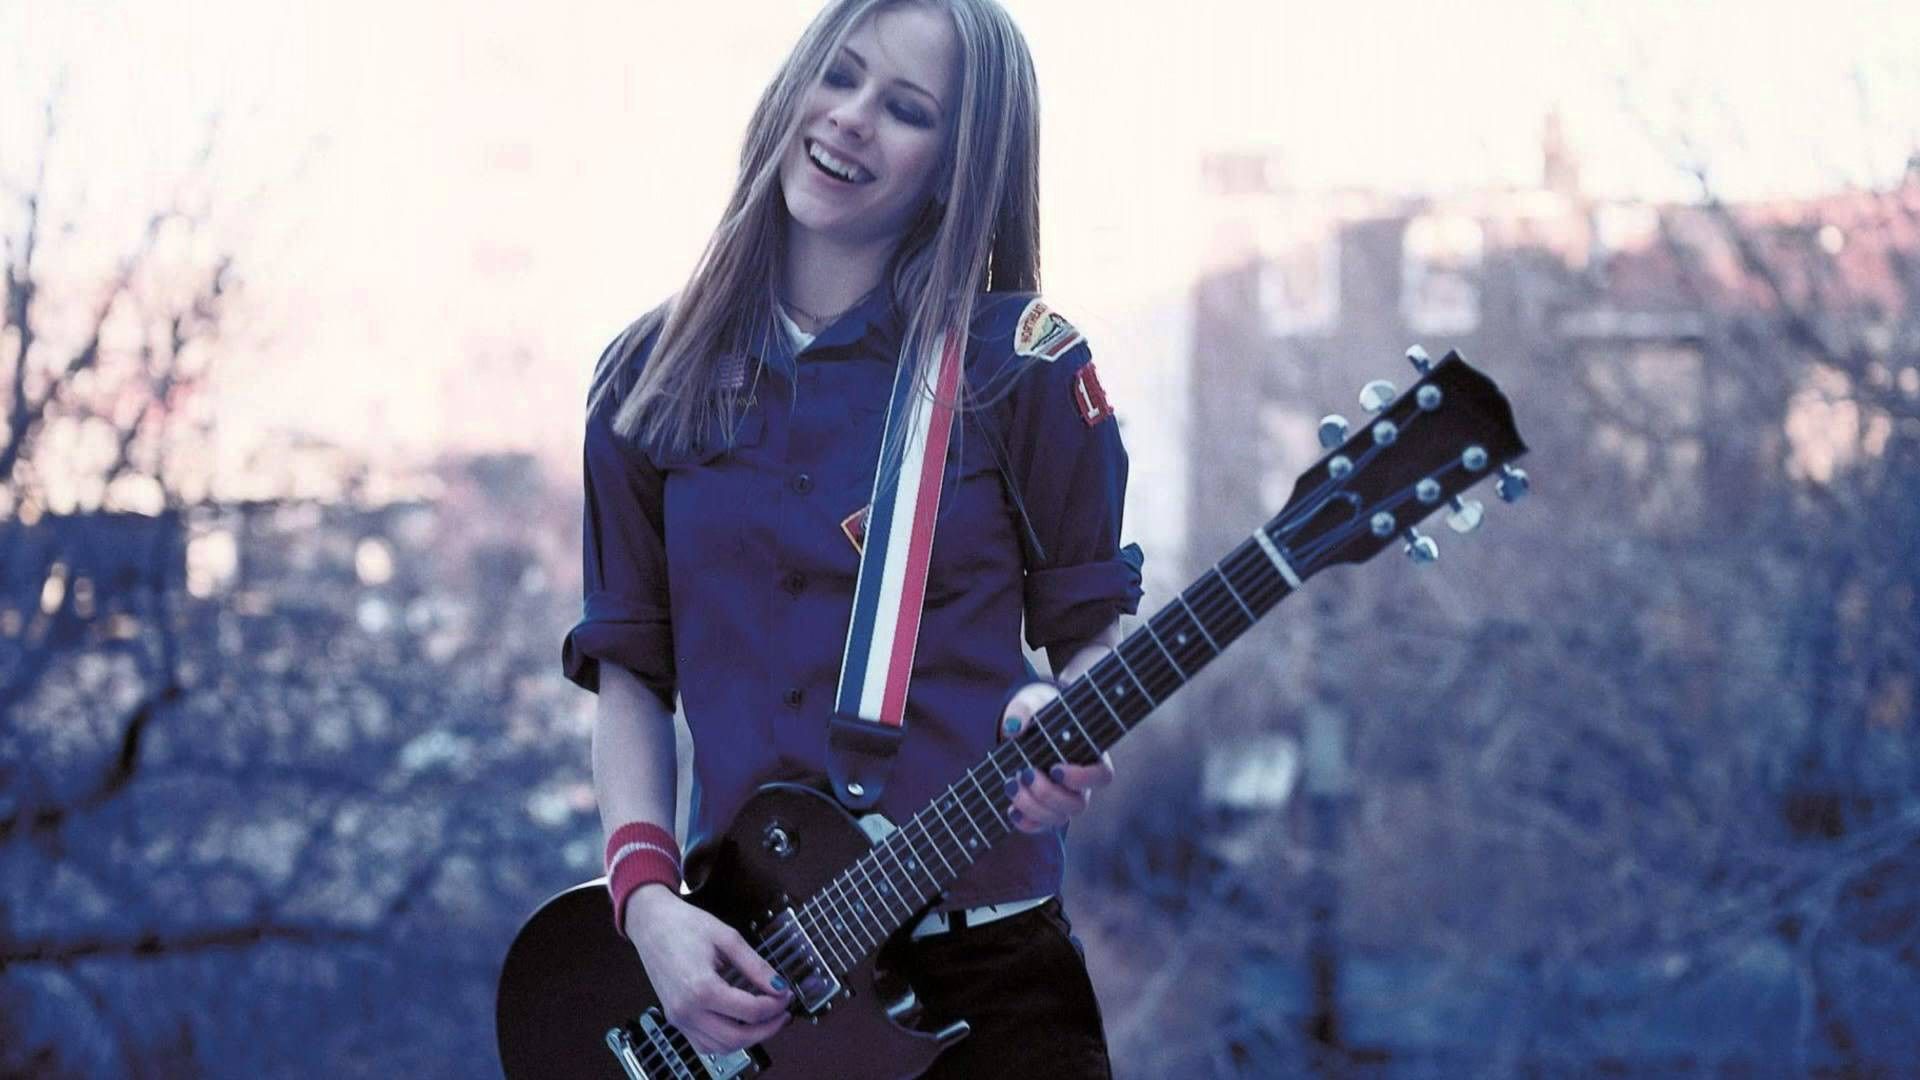 Avril Lavigne's Sk8er Boi came out 15 years ago today, and it's just as brilliant now as it was then.